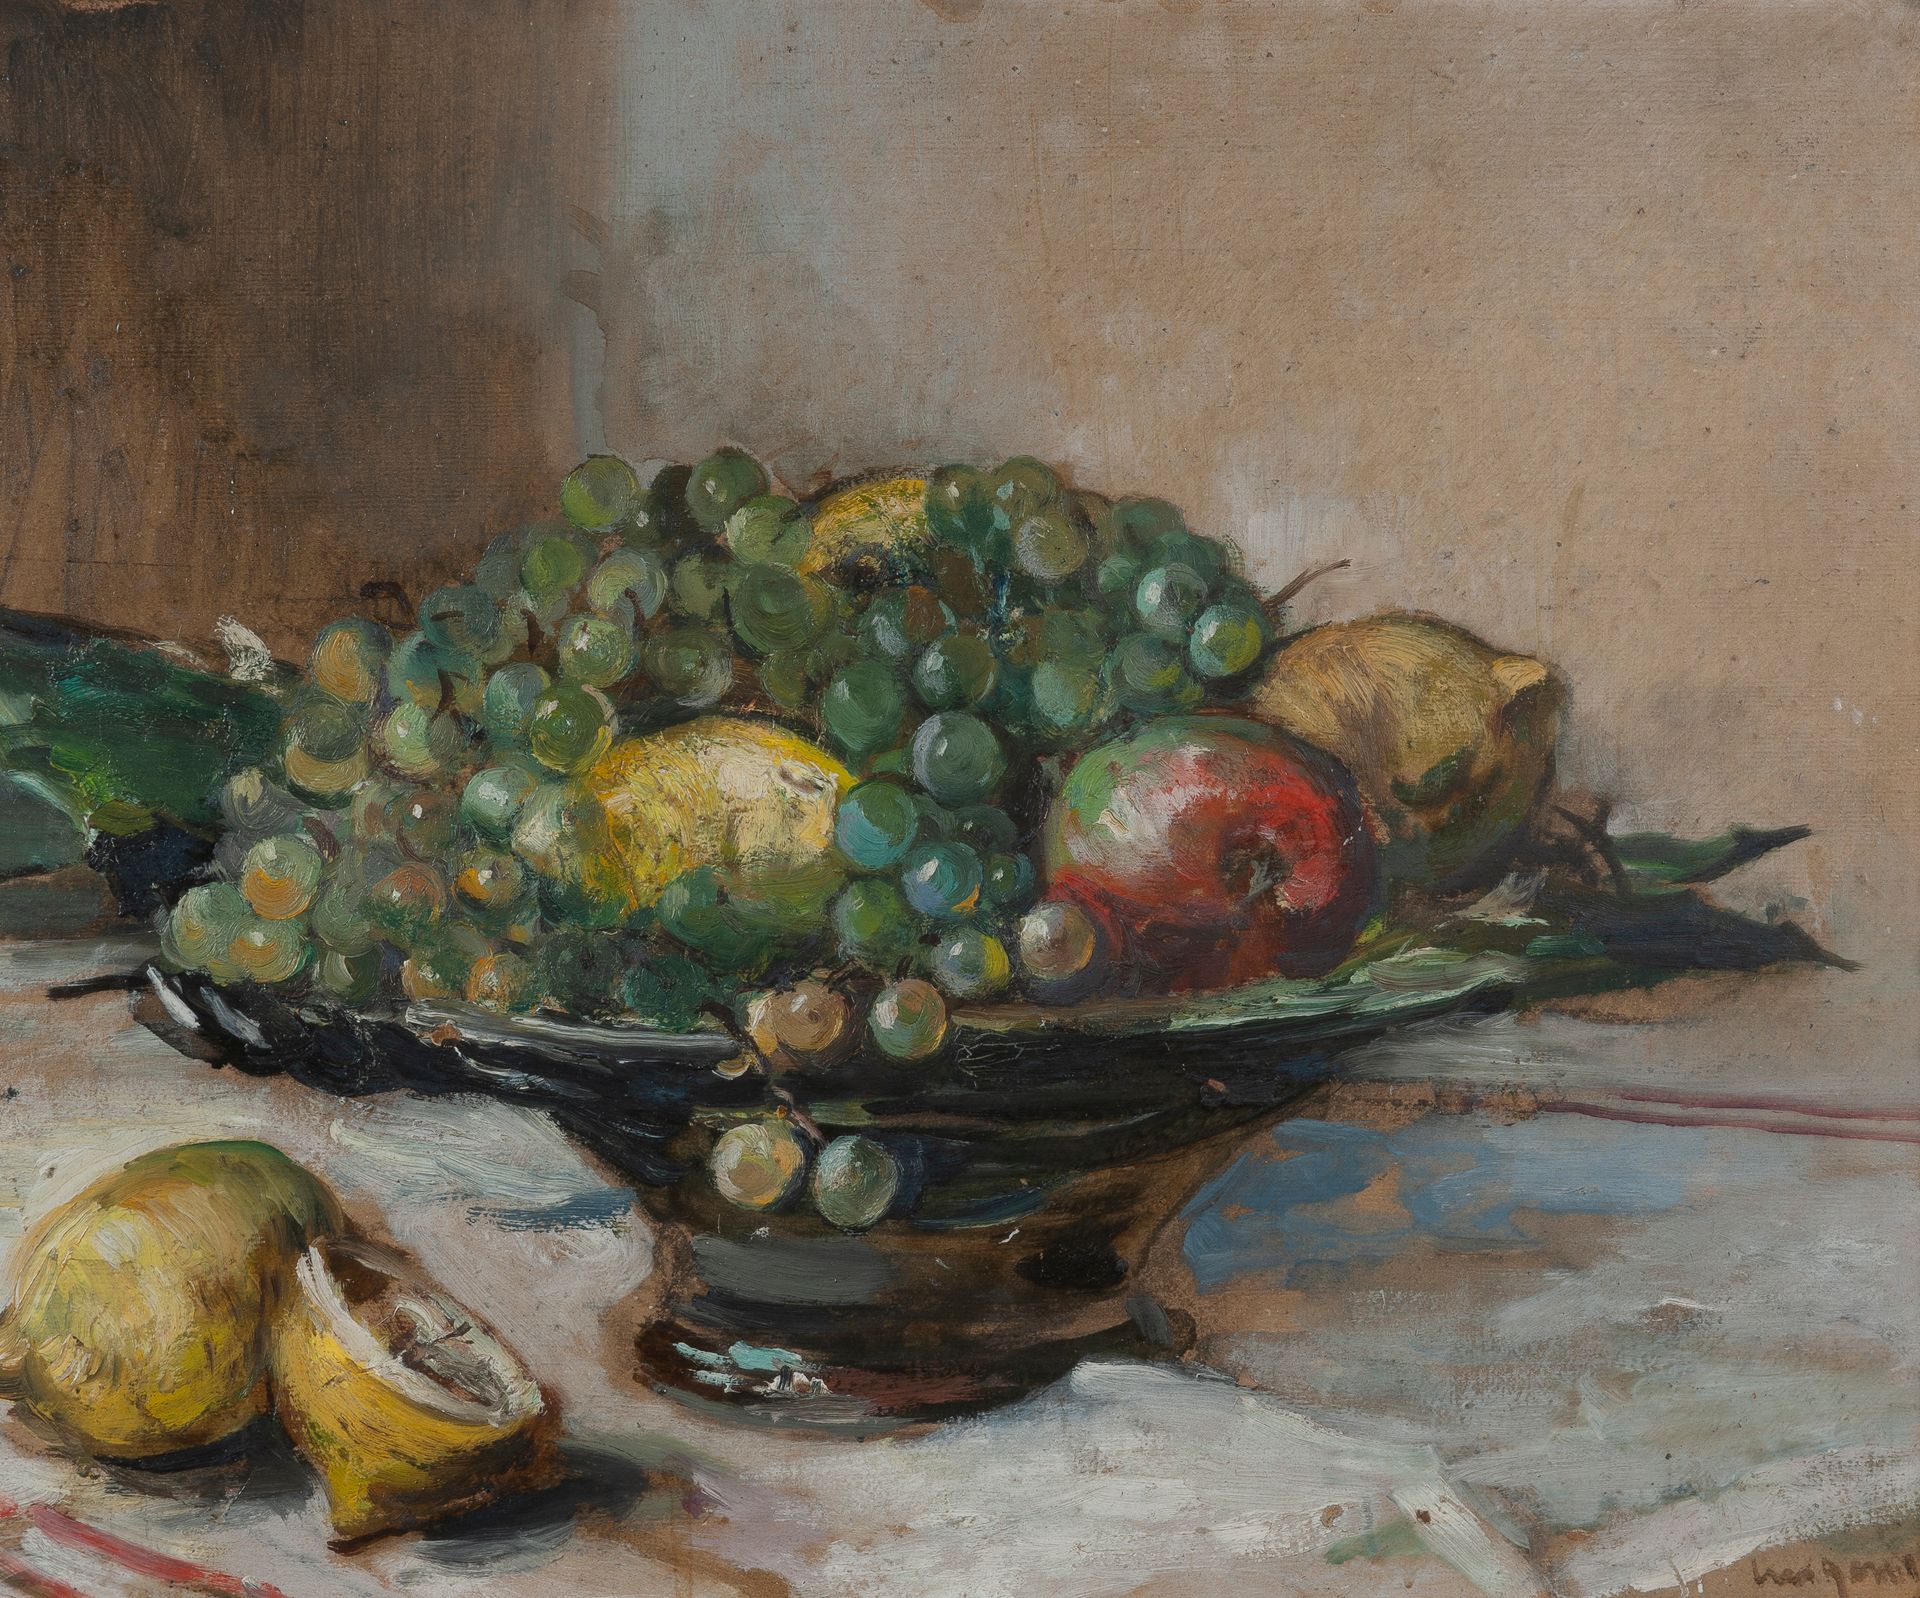 Null Ferdinand LUIGINI (1870-1943)

Still life with a compote and lemons

Oil si&hellip;